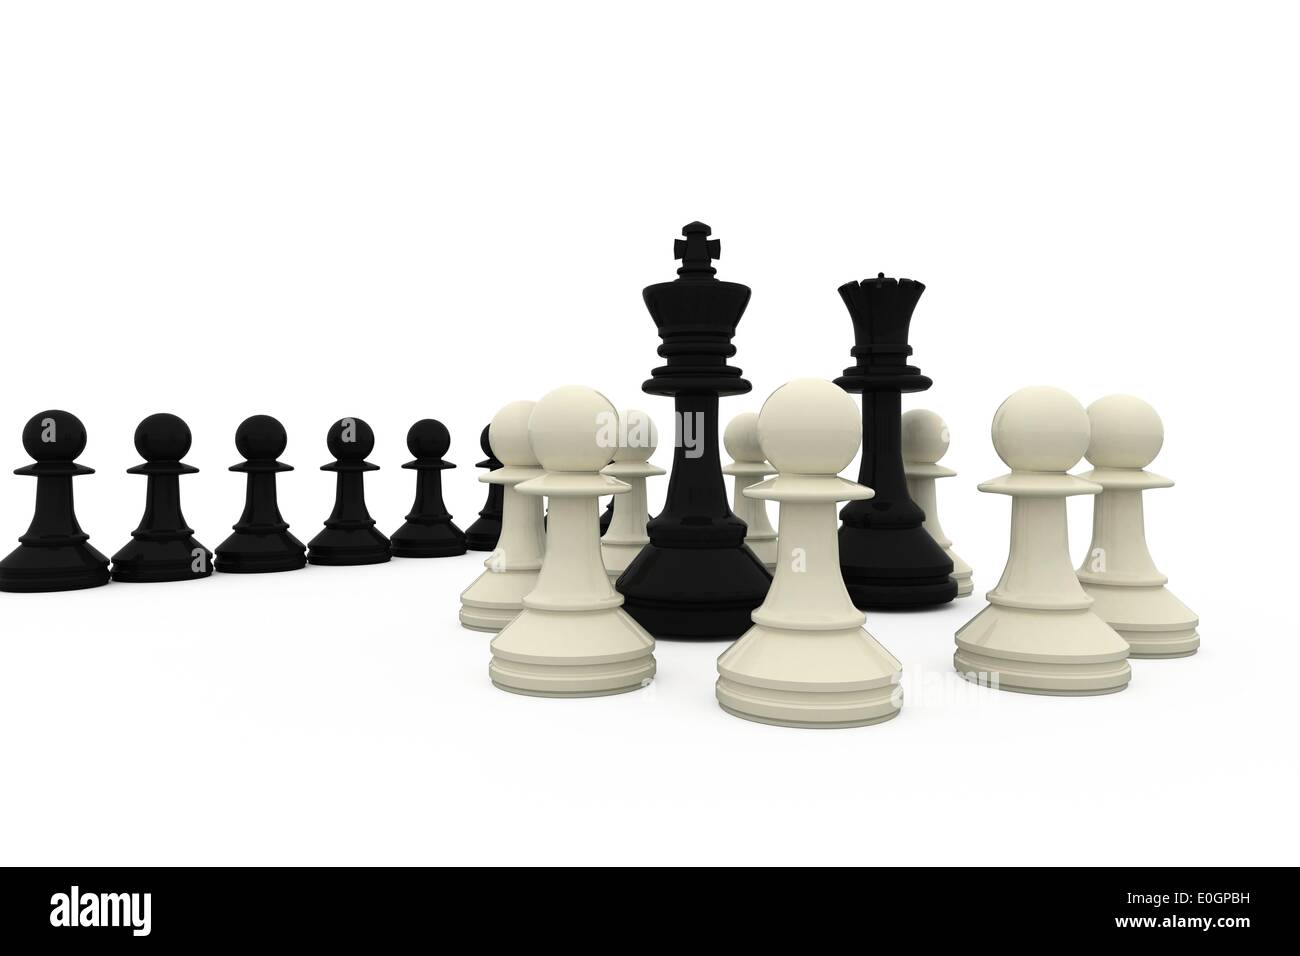 Black chess king holding white queen Stock Photo - Alamy